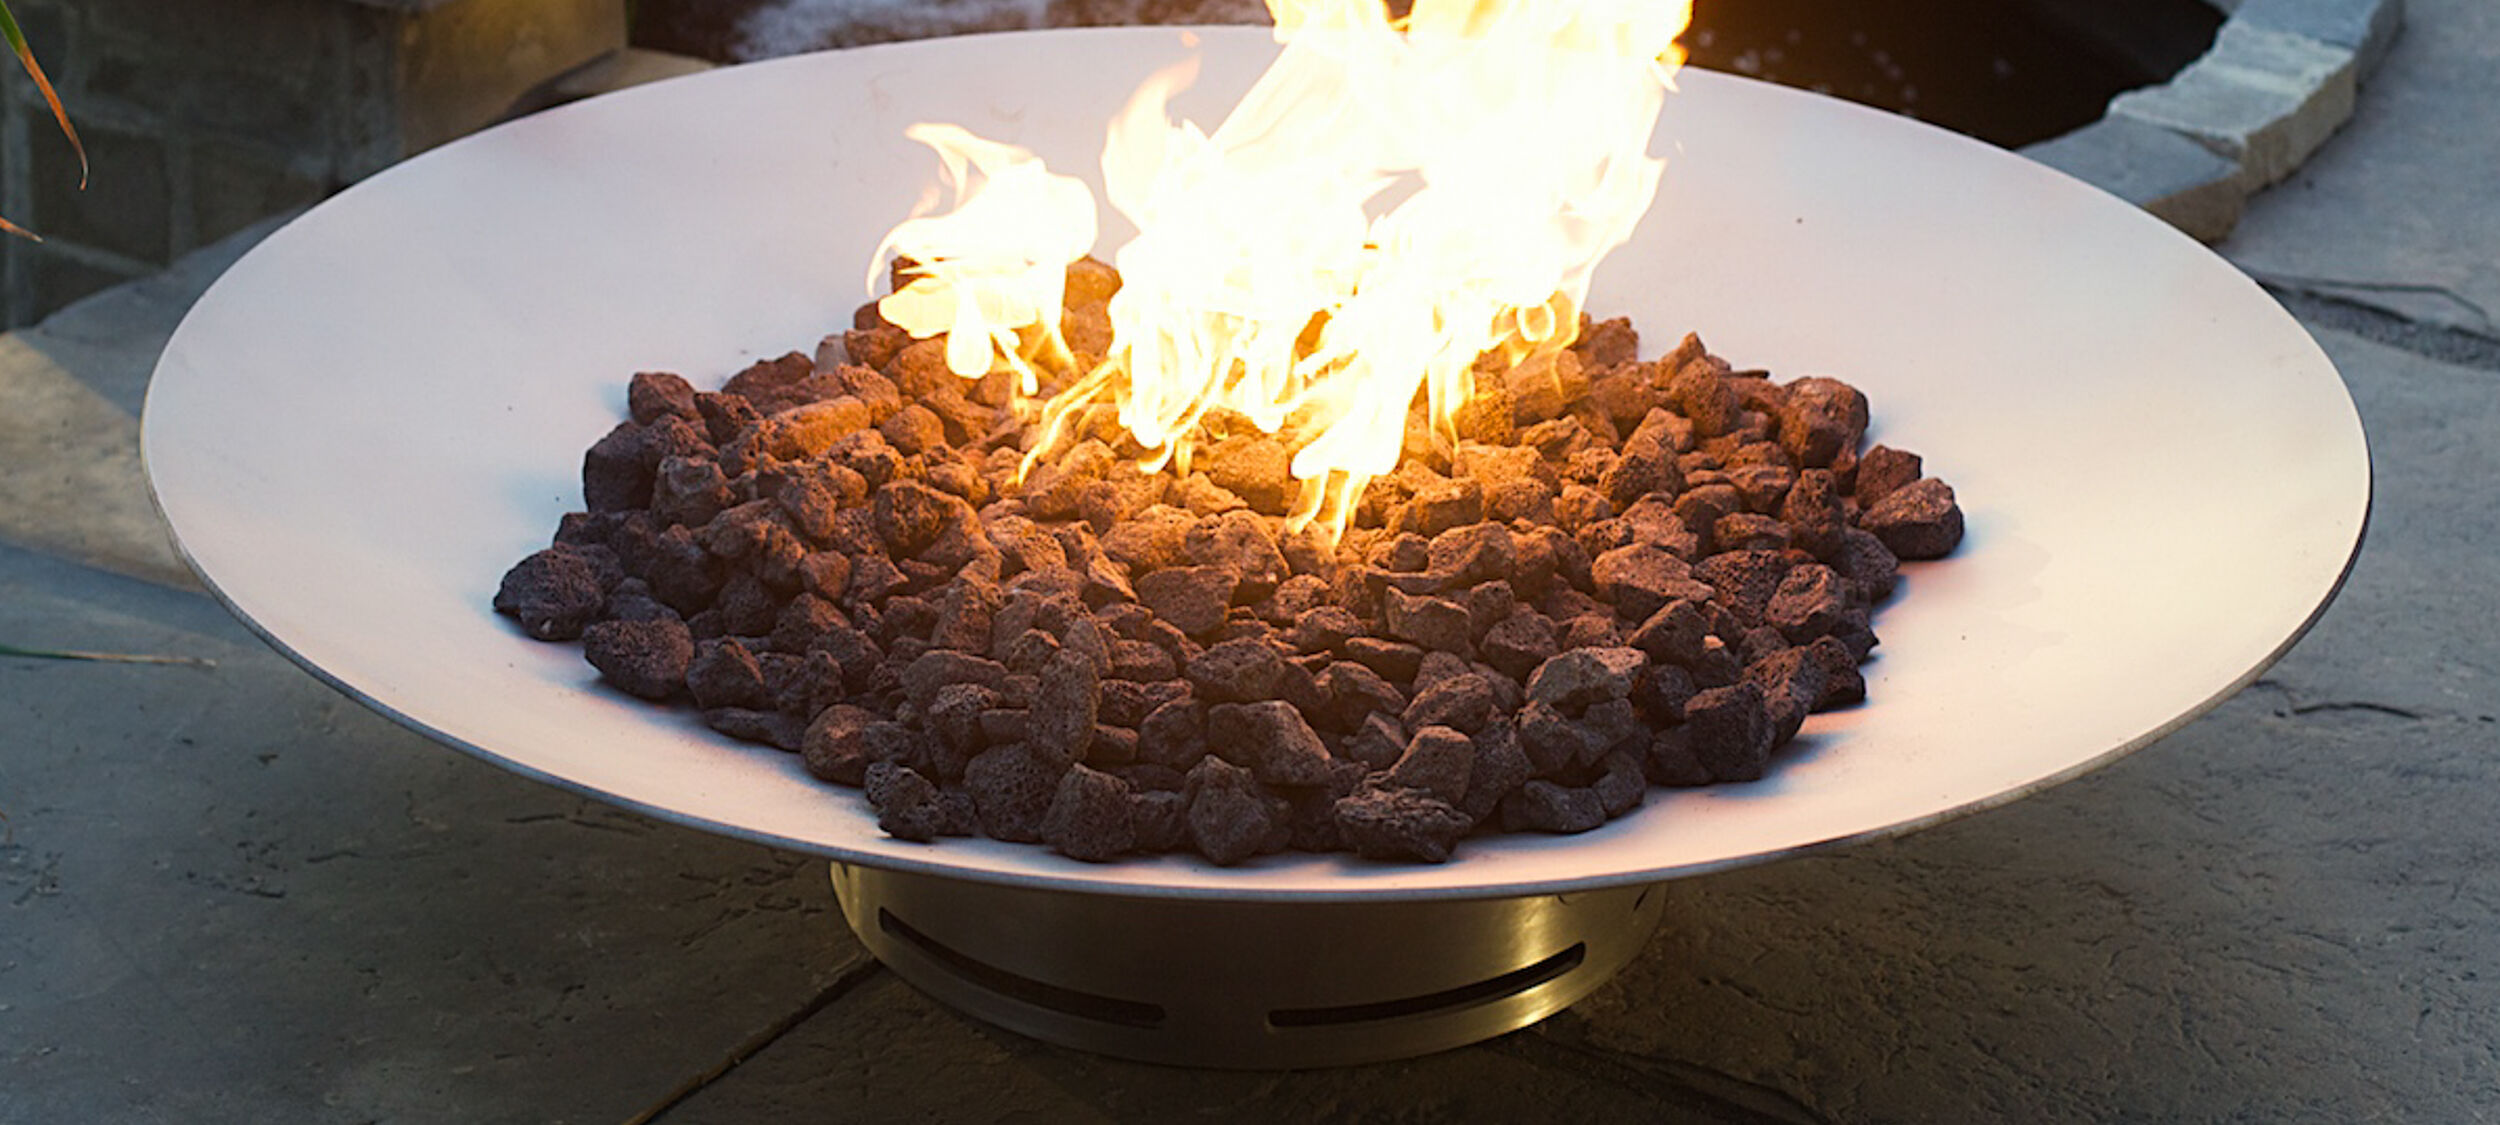 Fire Pit Media Lava Rock Glass, How To Use Lava Rocks For A Fire Pit